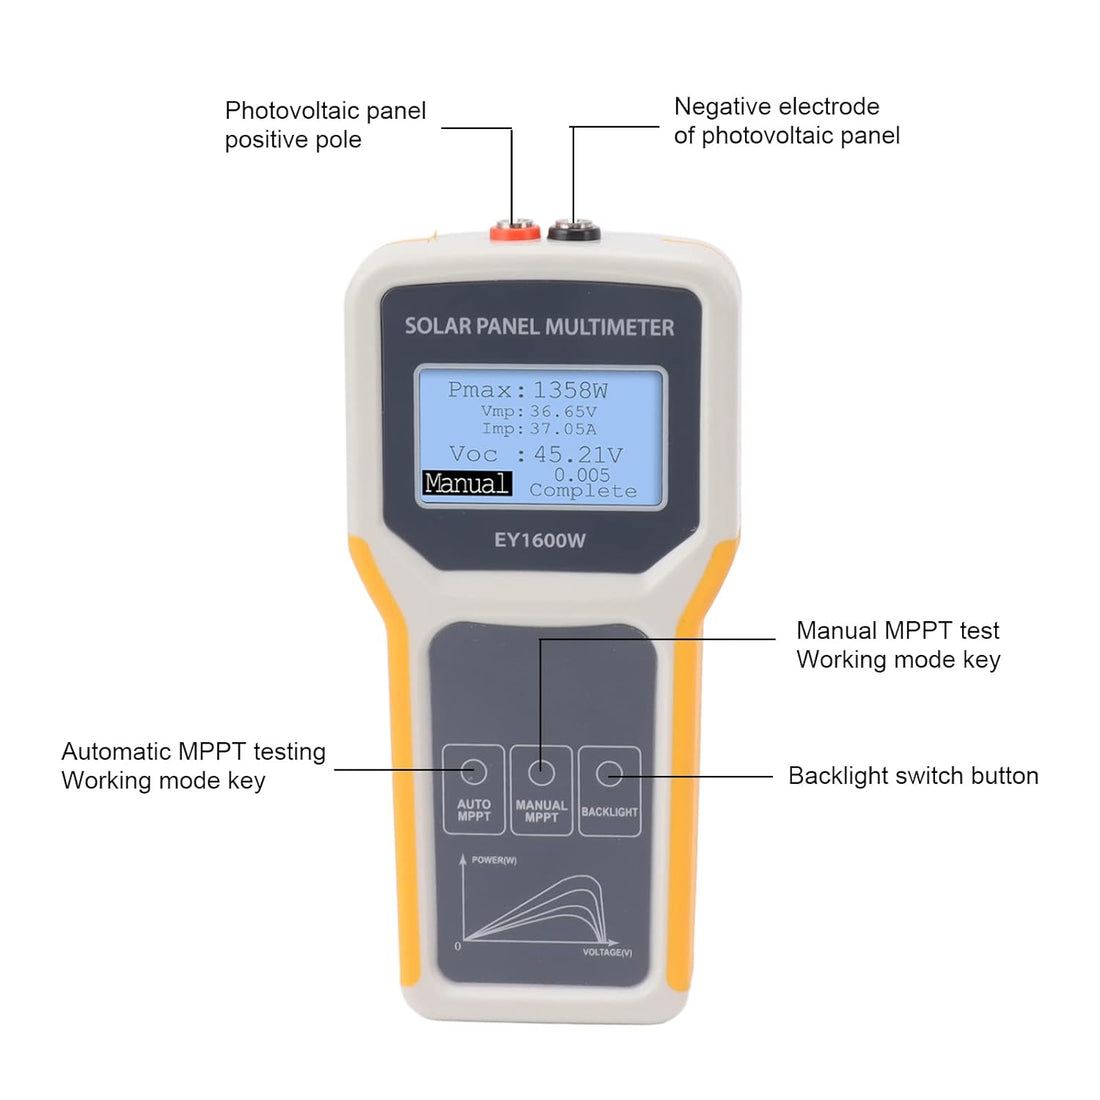 Solar Panel Tester, EY1600W Photovoltaic Multimeter with Backlight, MPPT Open Circuit Voltage Tool for Solar PV Testing for Car Boat